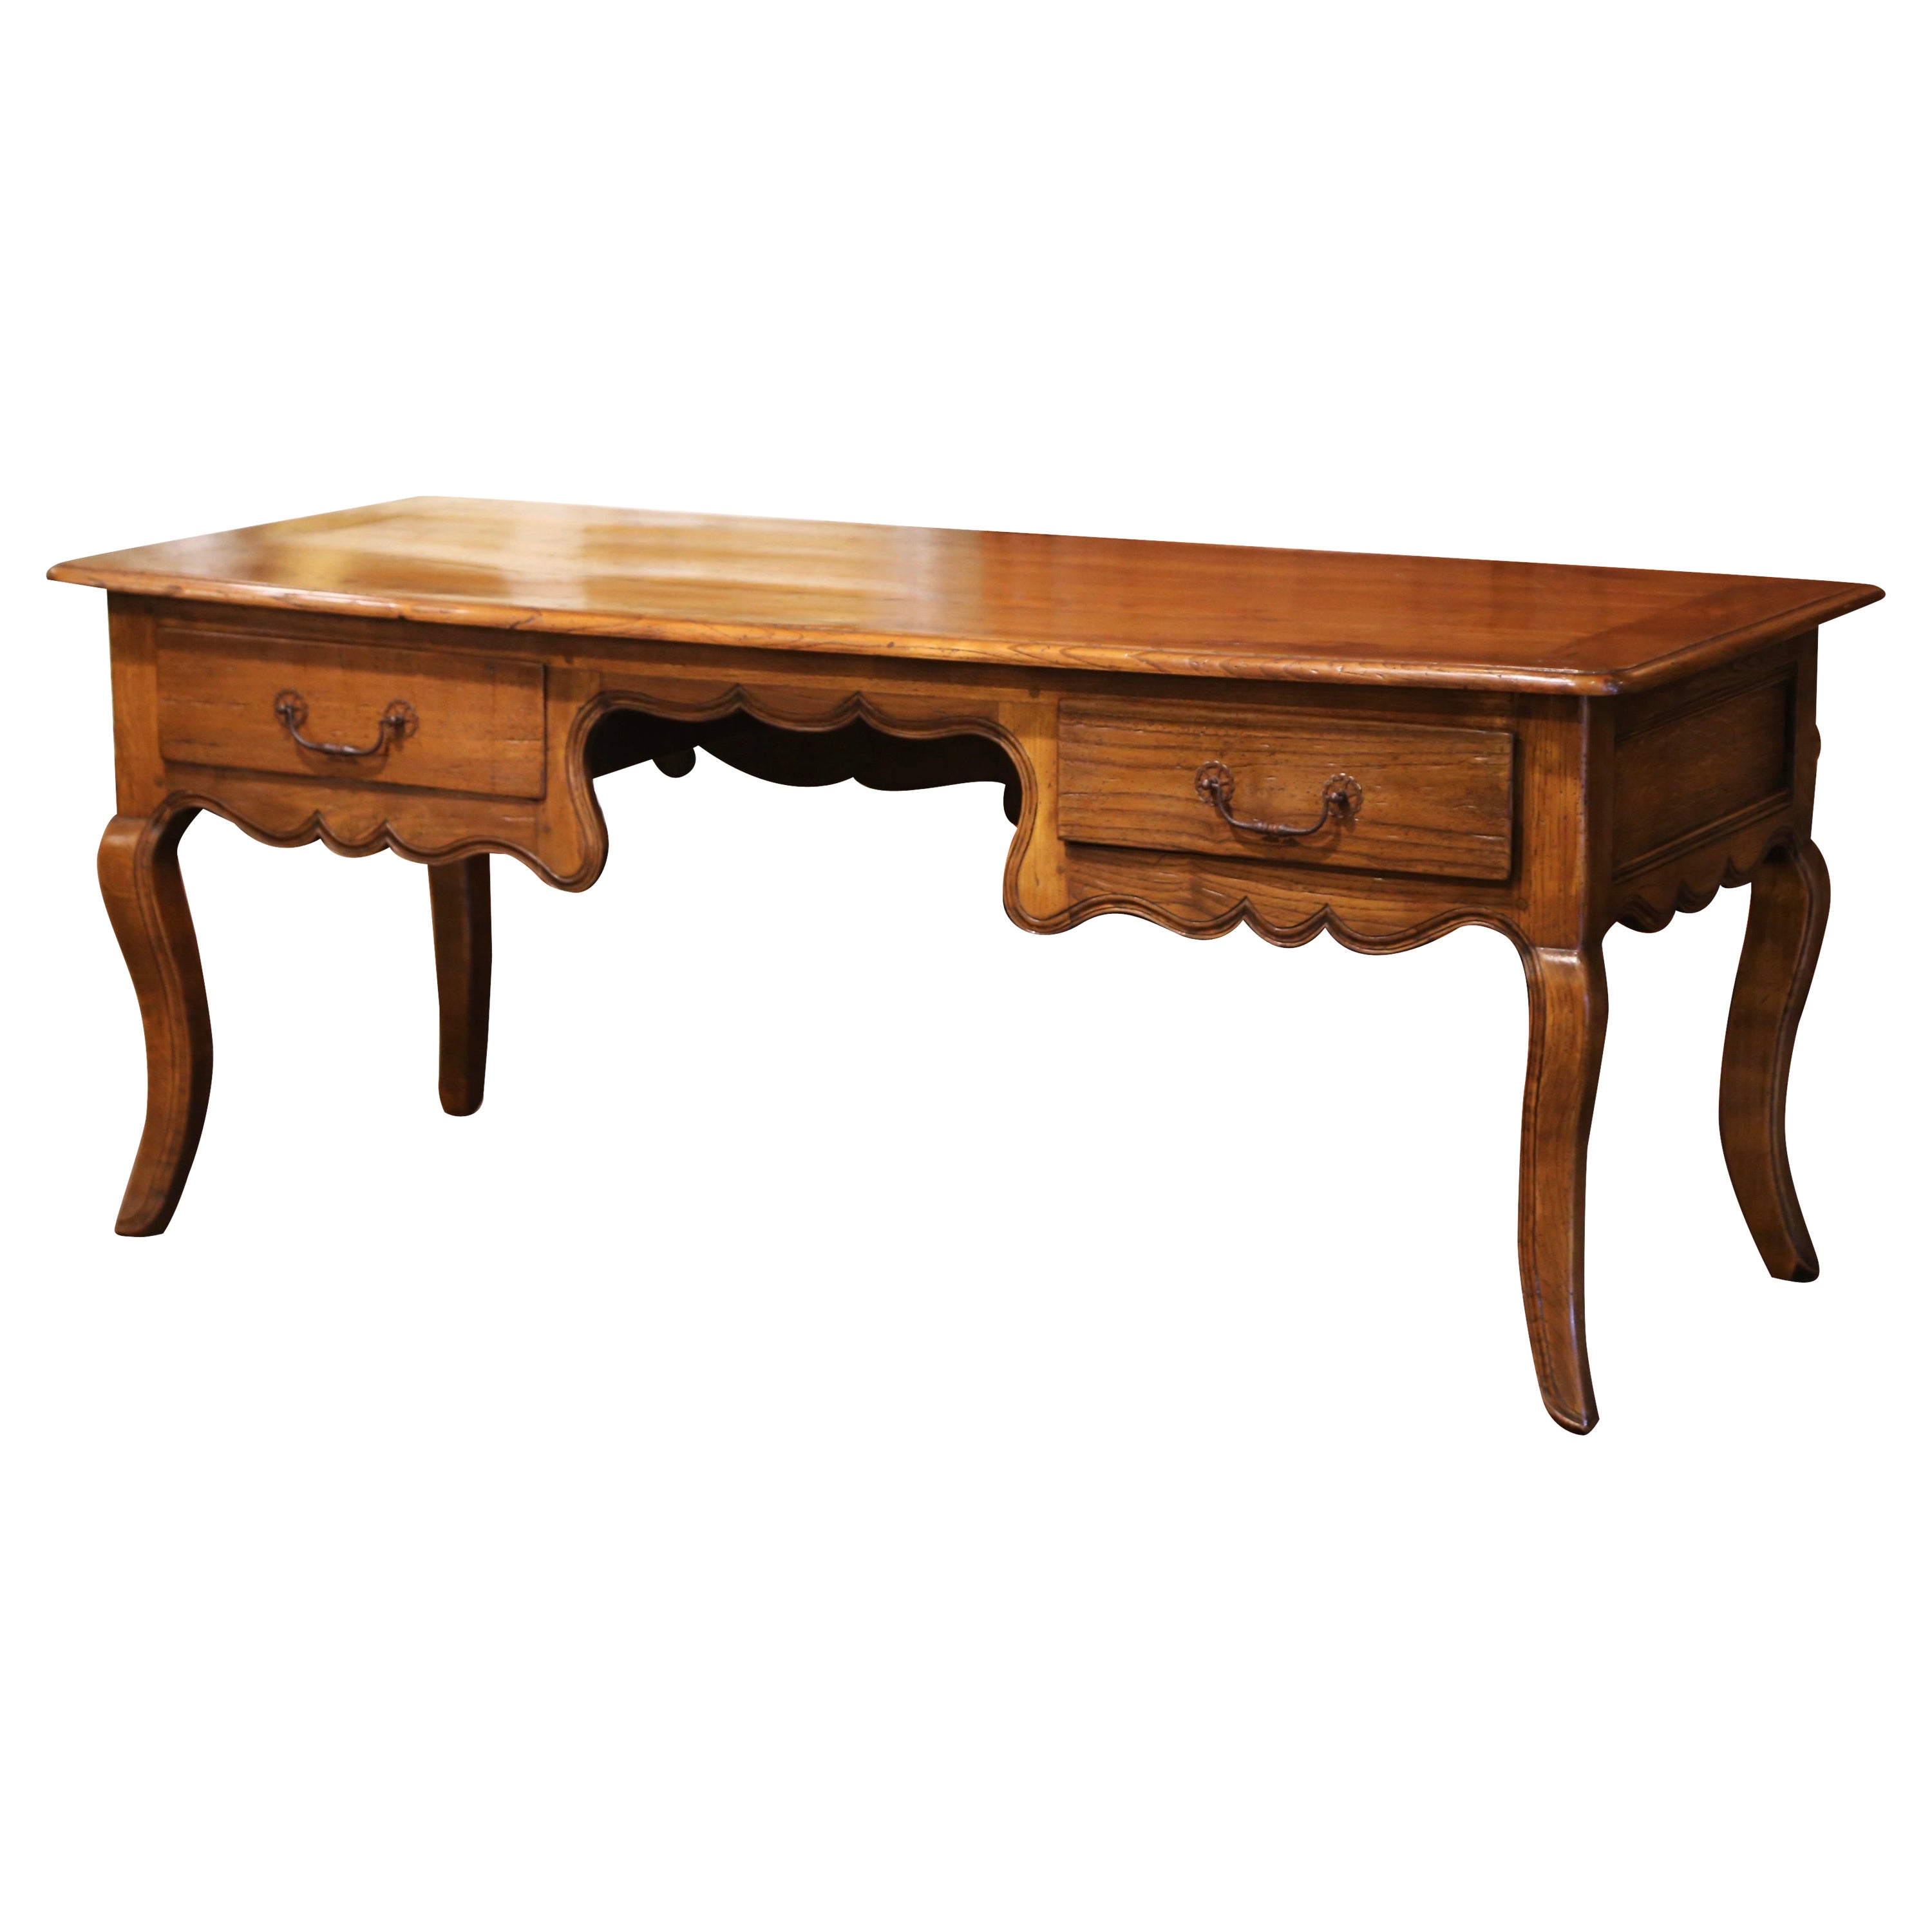 Late 19th Century French Louis XV Carved Chestnut Desk Table with Drawers 